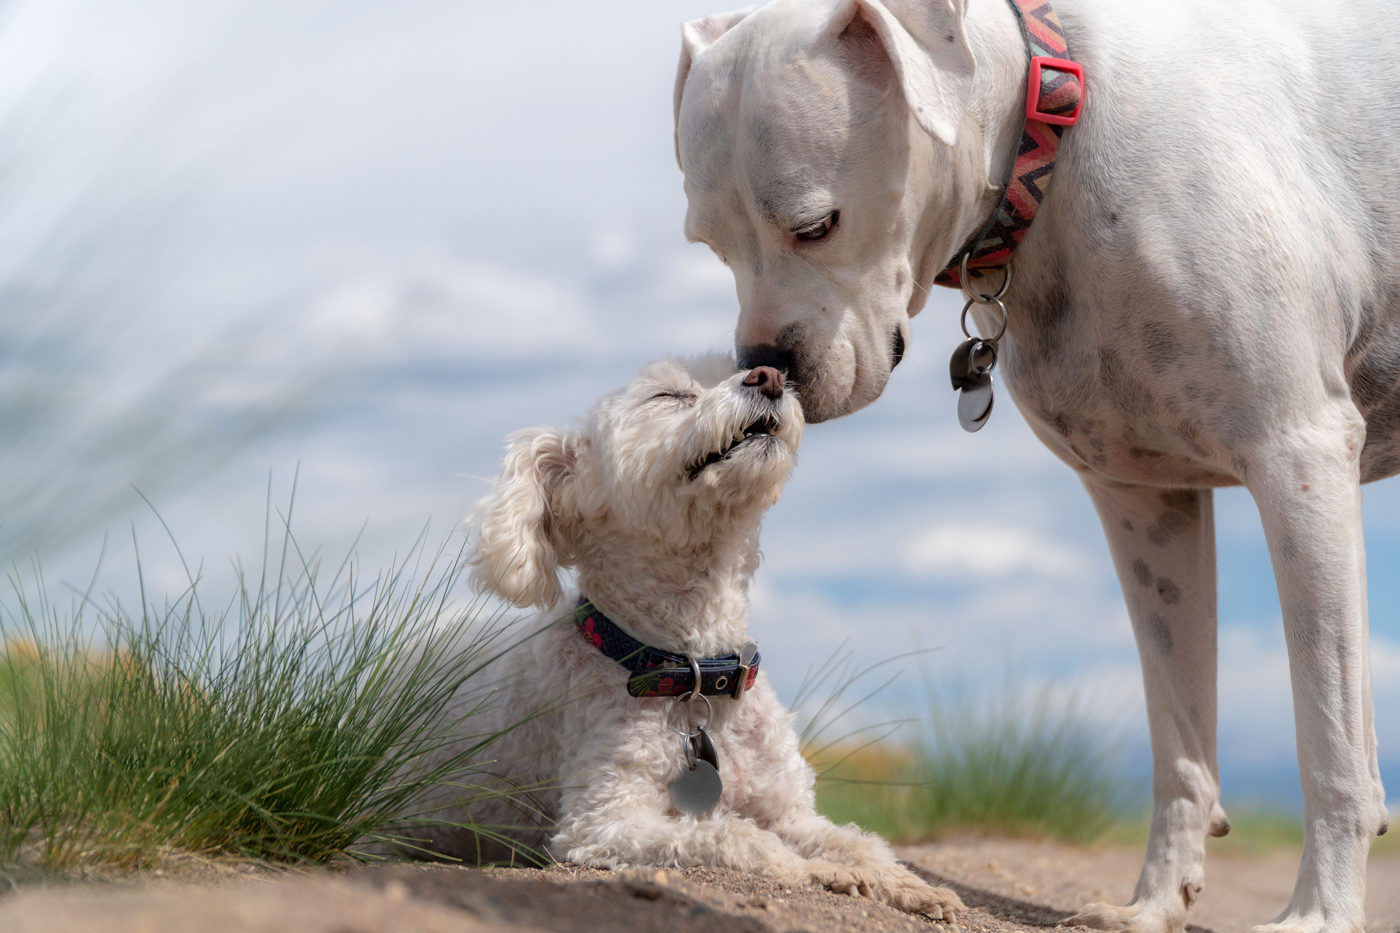 A dog smelling another dog while on a walk on a beach